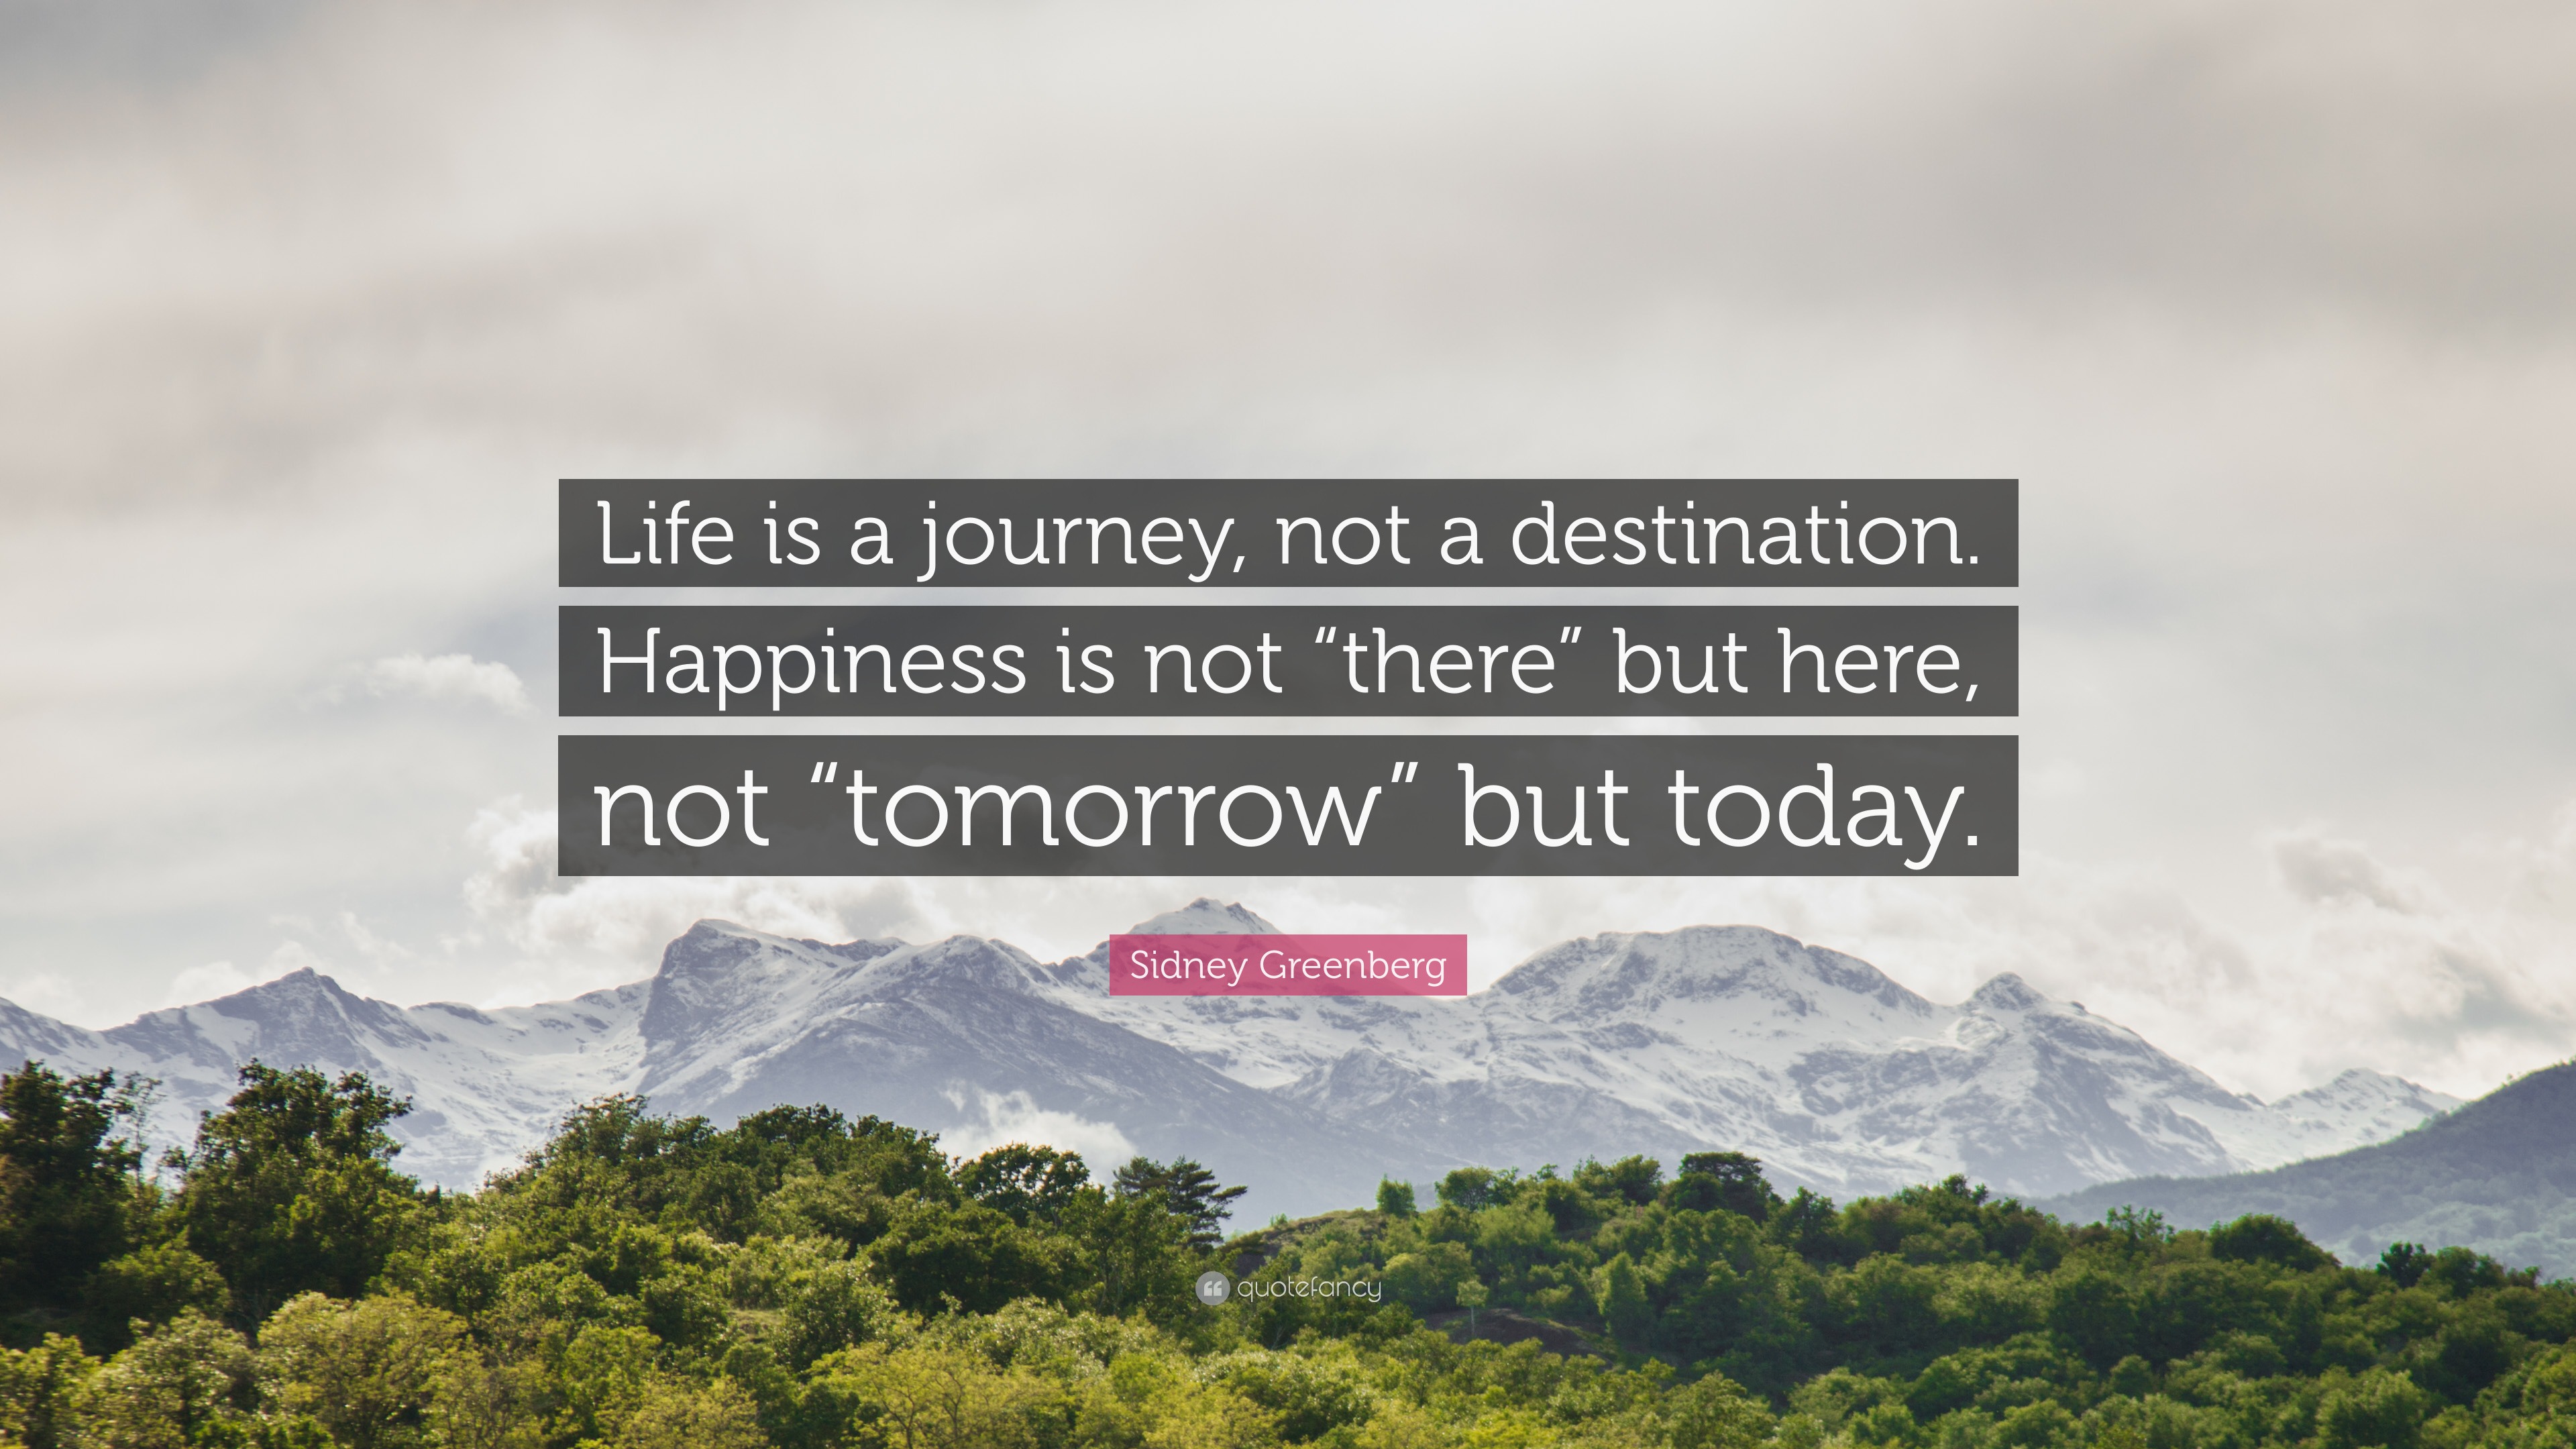 Sidney Greenberg Quote “Life is a journey not a destination Happiness is